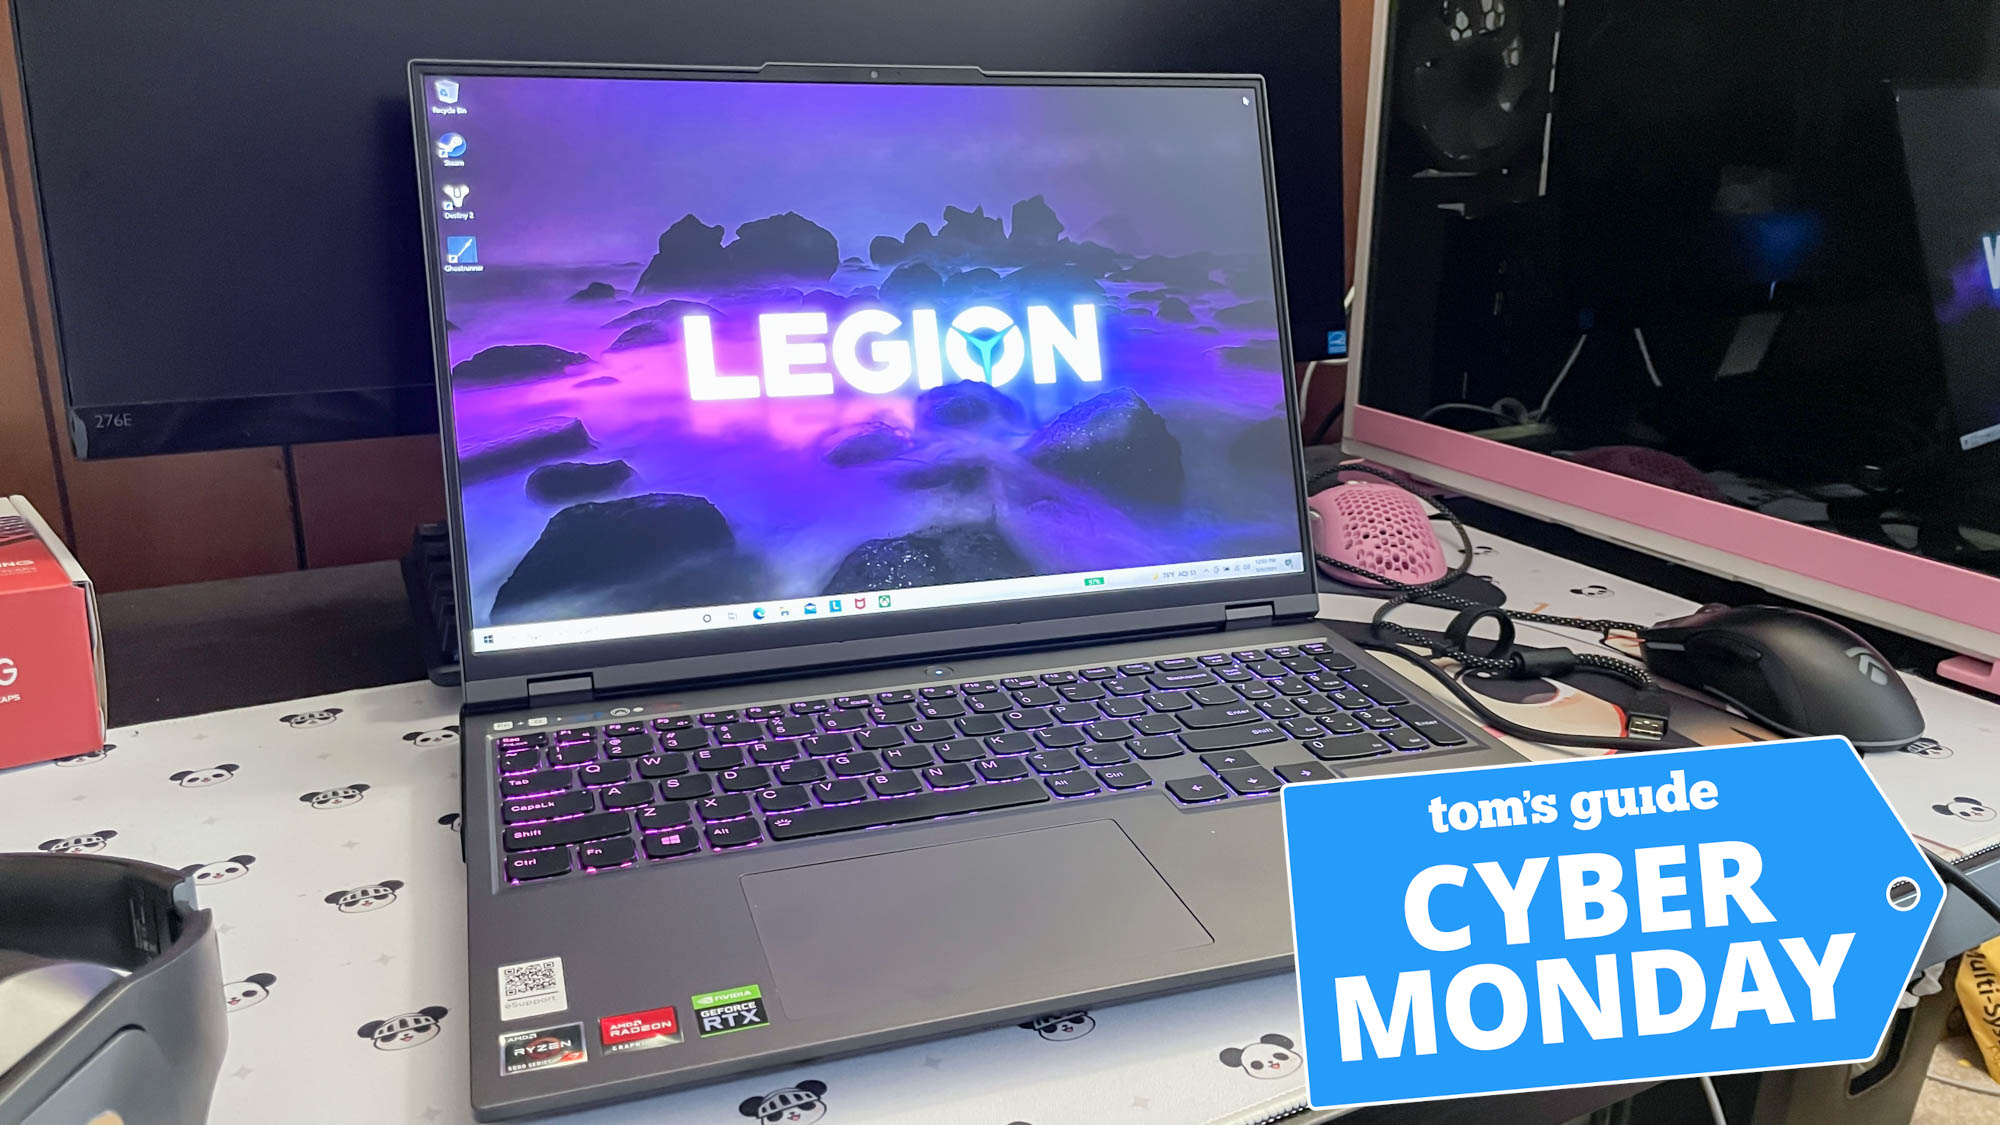 lenovo legion 5 pro sitting on desk with display on and cyber monday tag